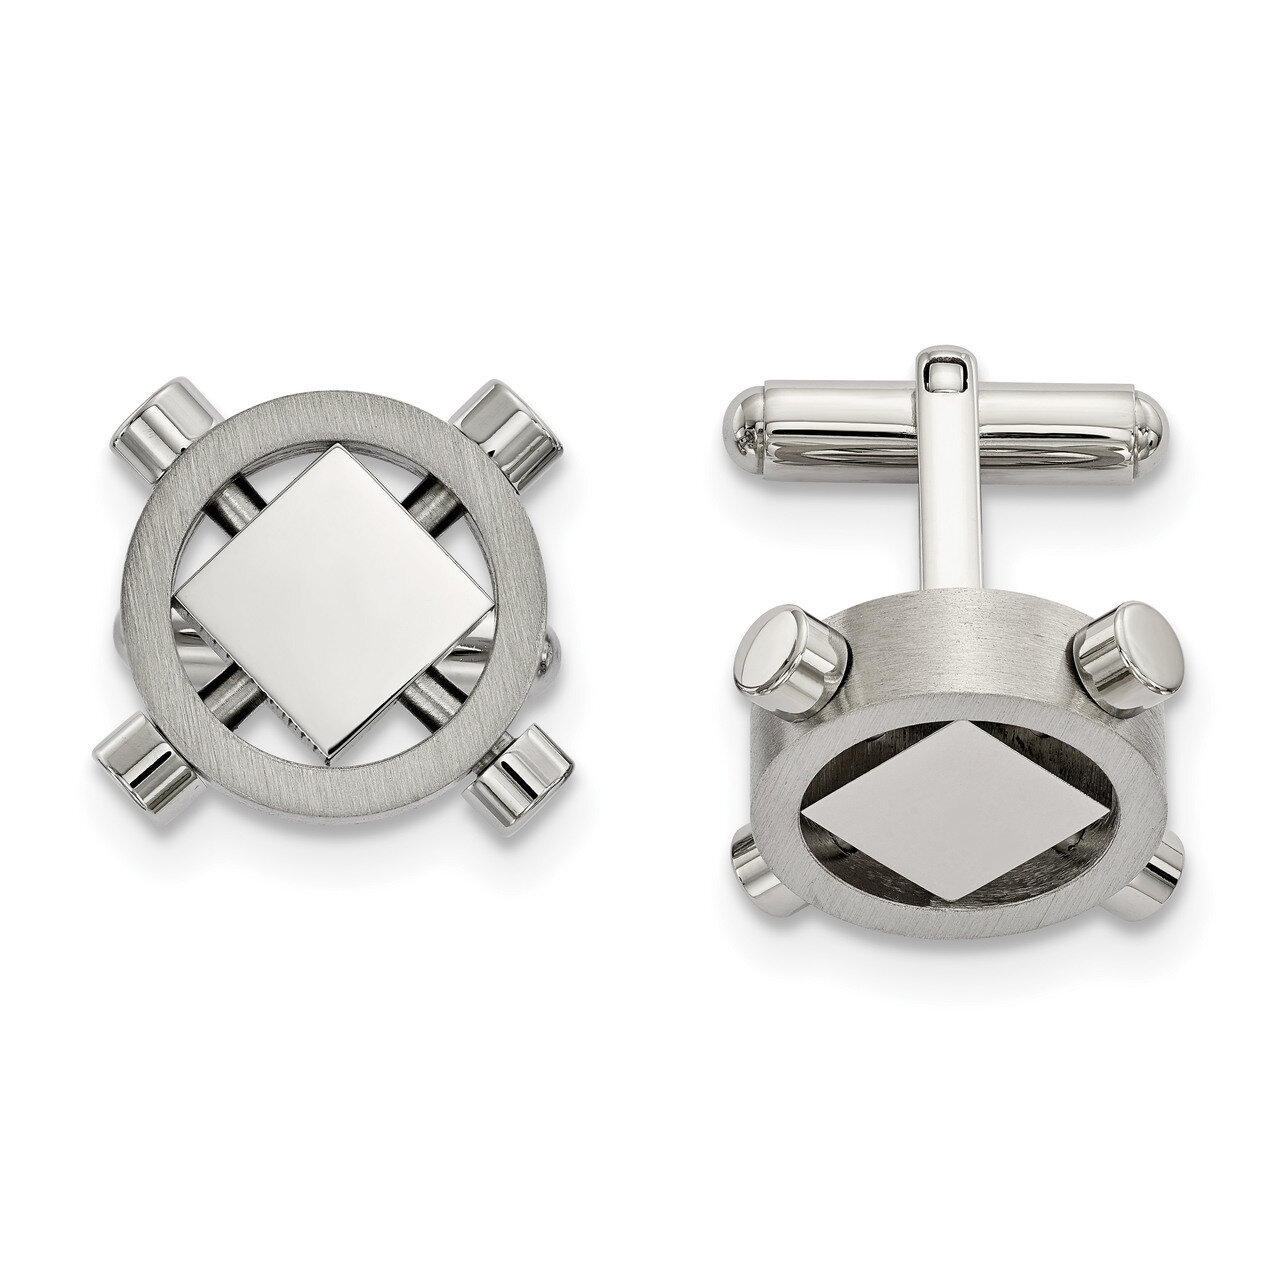 Cufflinks Stainless Steel Brushed and Polished SRC376